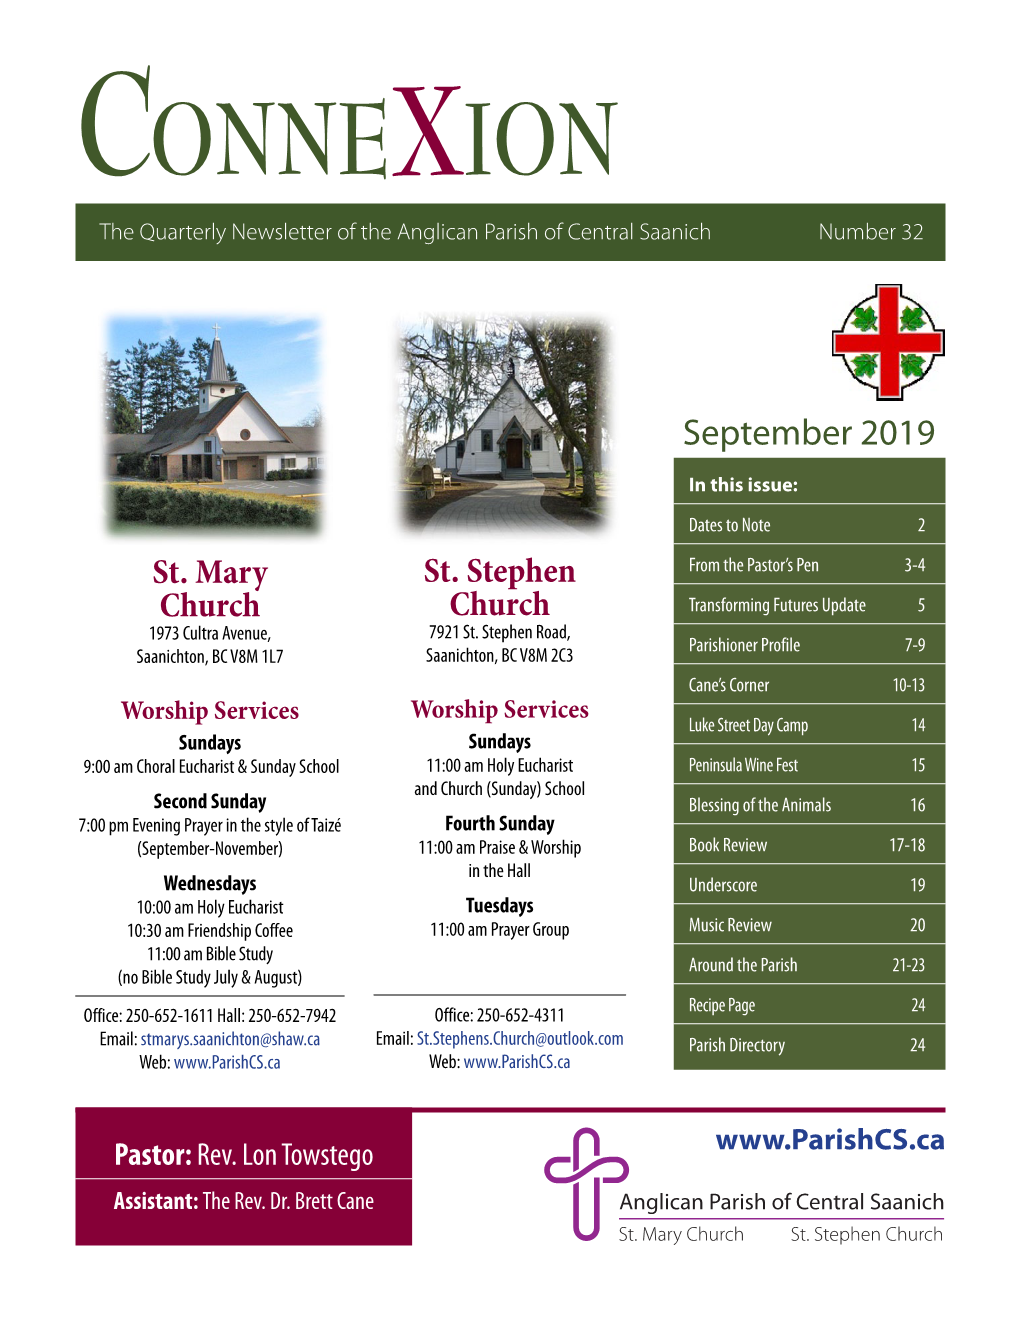 Connexion the Quarterly Newsletter of the Anglican Parish of Central Saanich Number 32